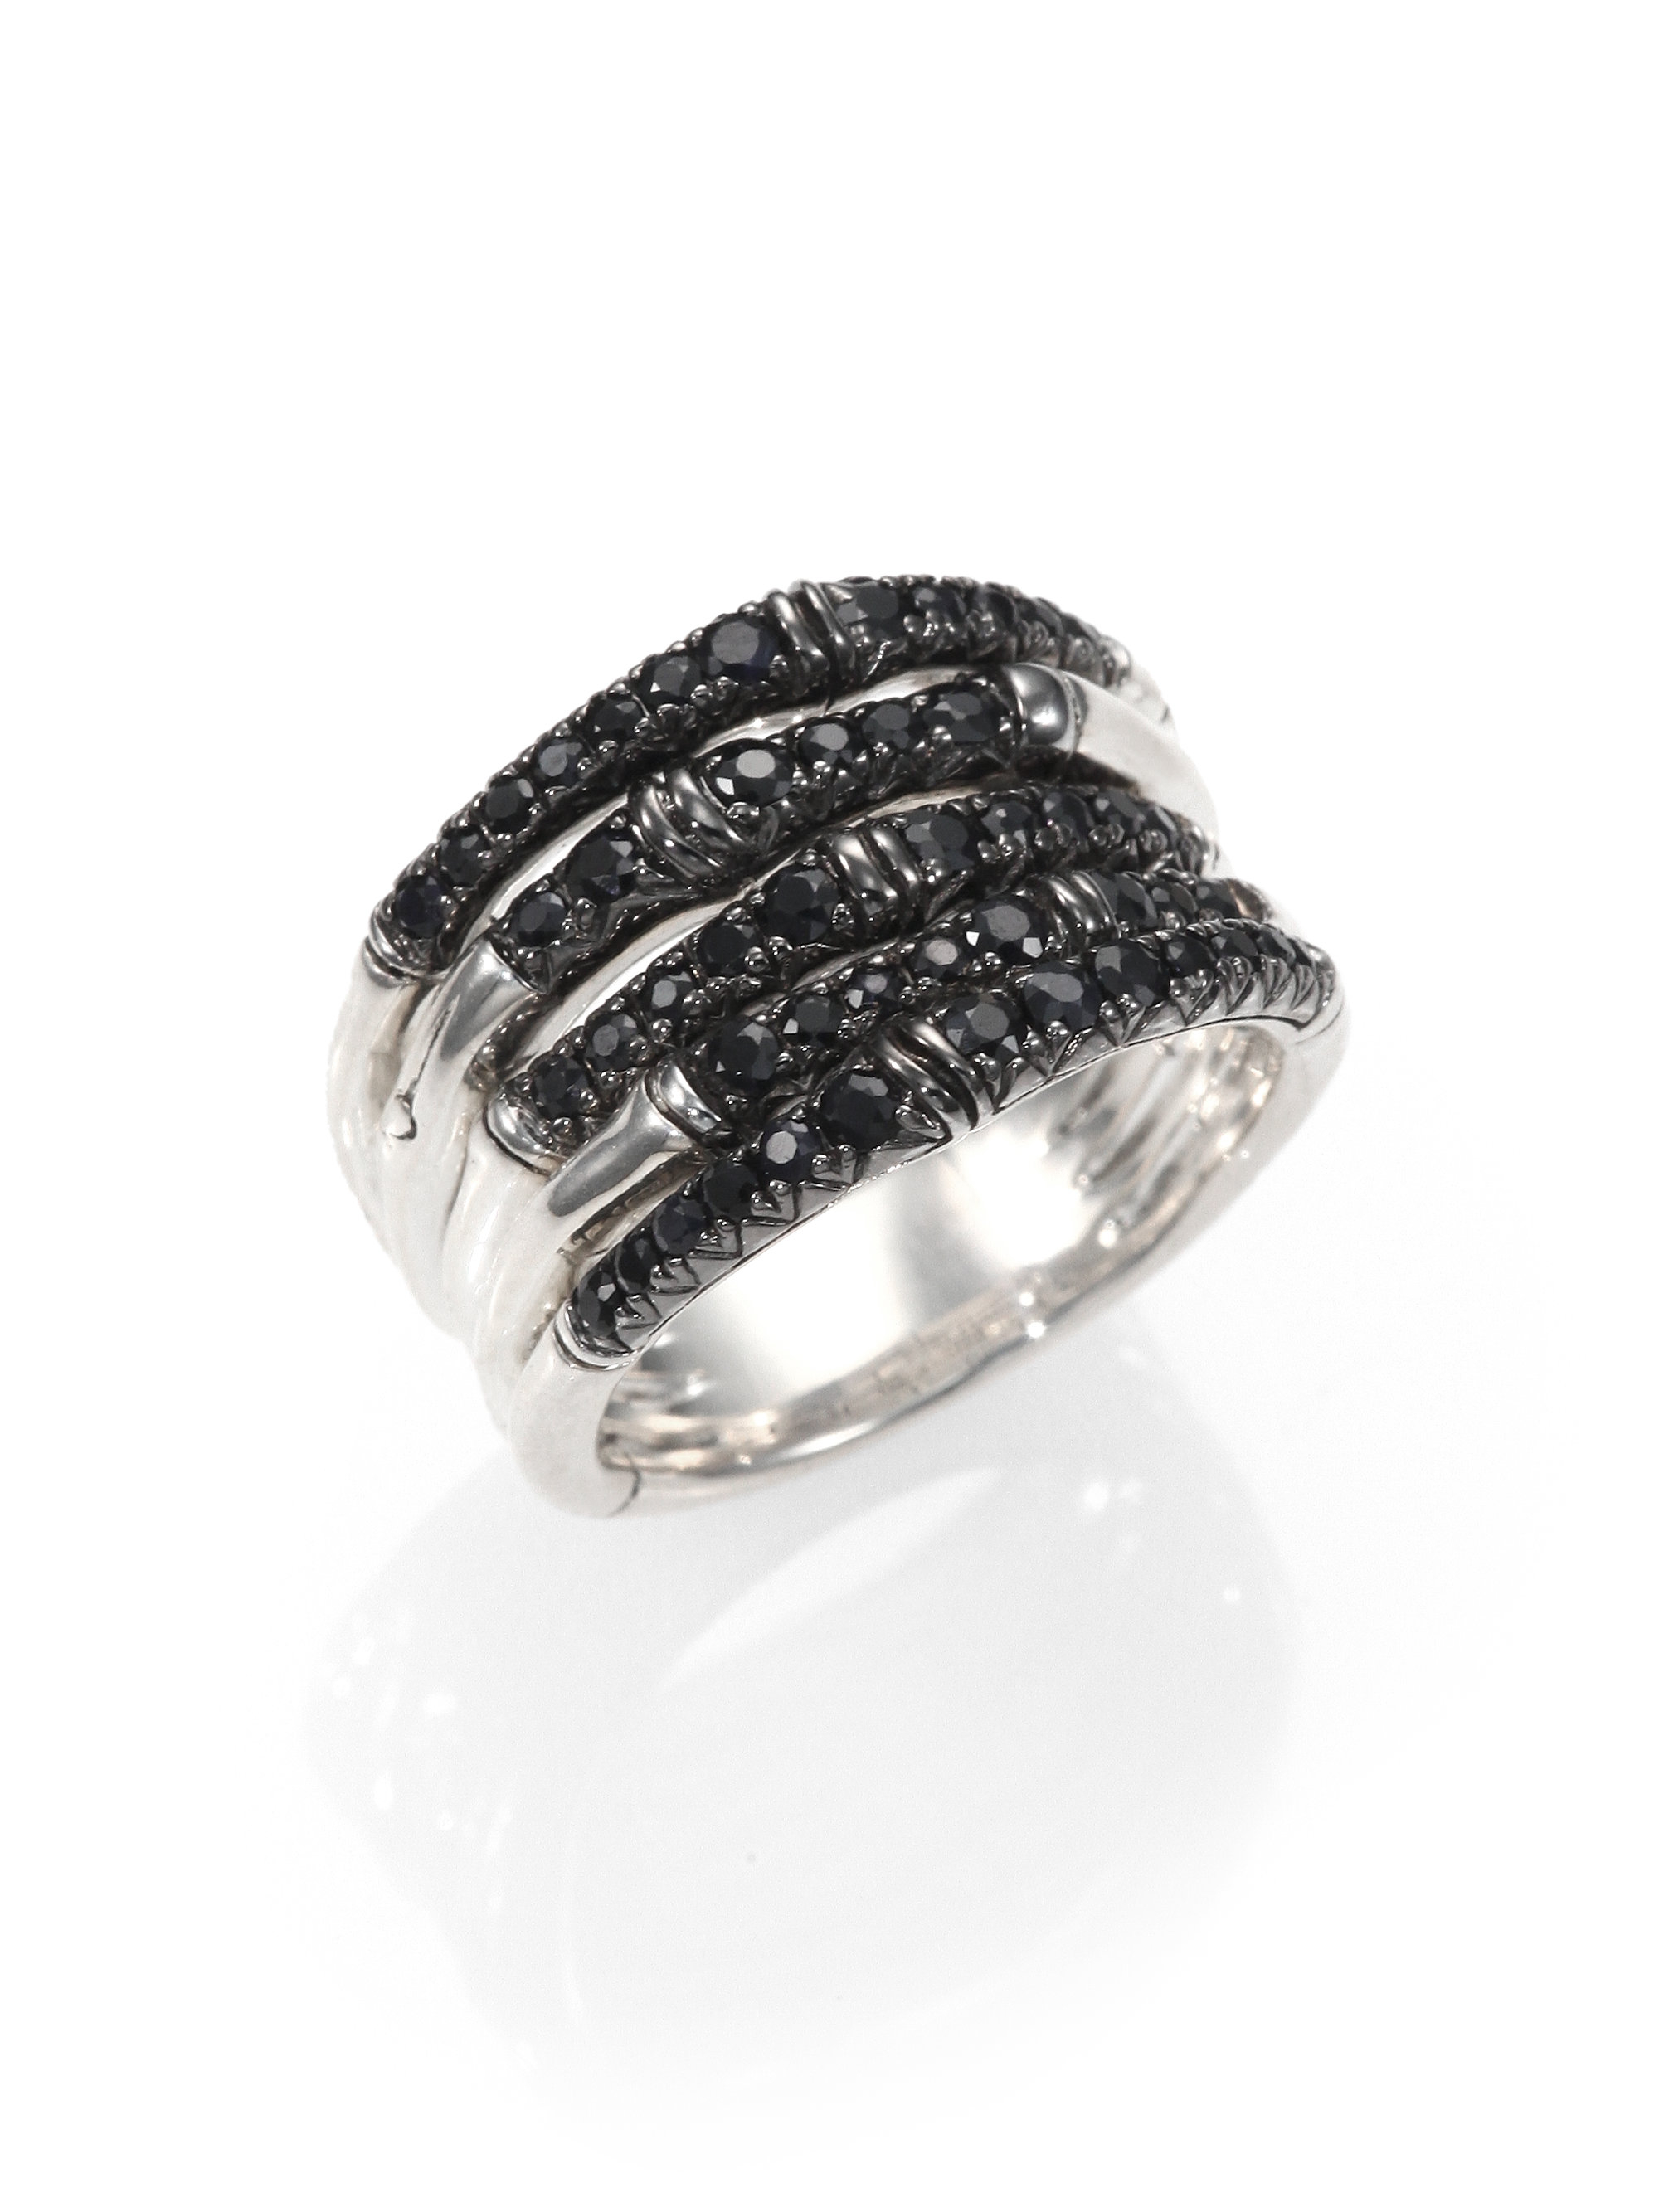 John hardy Bamboo Black Sapphire & Sterling Silver Multi-band Ring in